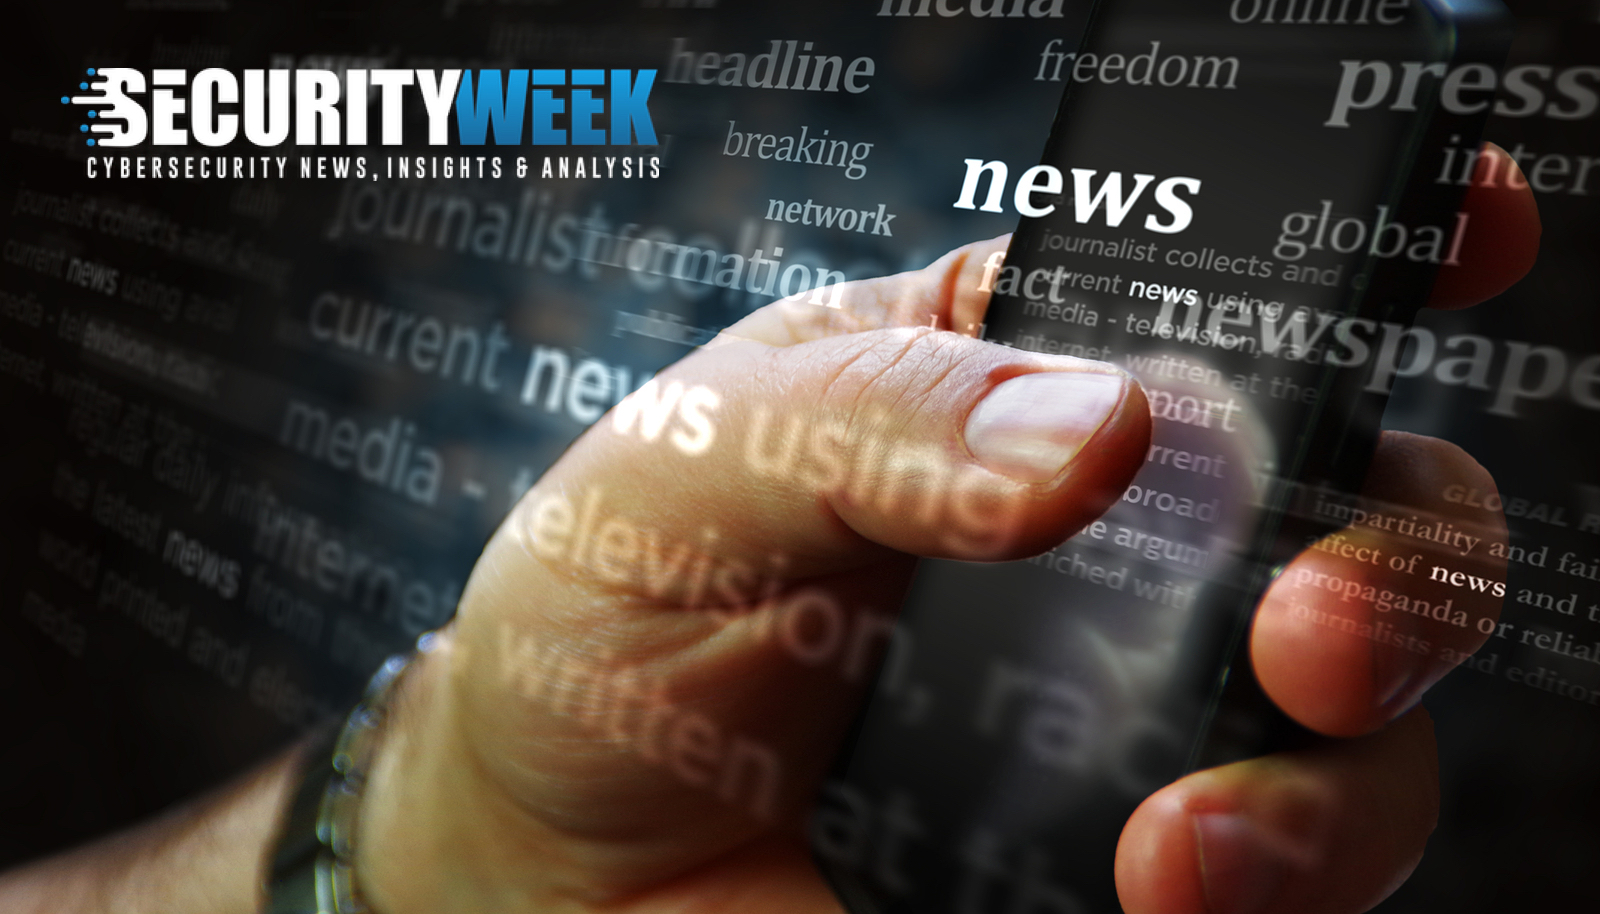 In Other News: New Analysis of Snowden Files, Yubico Goes Public, Election Hacking – Source: www.securityweek.com